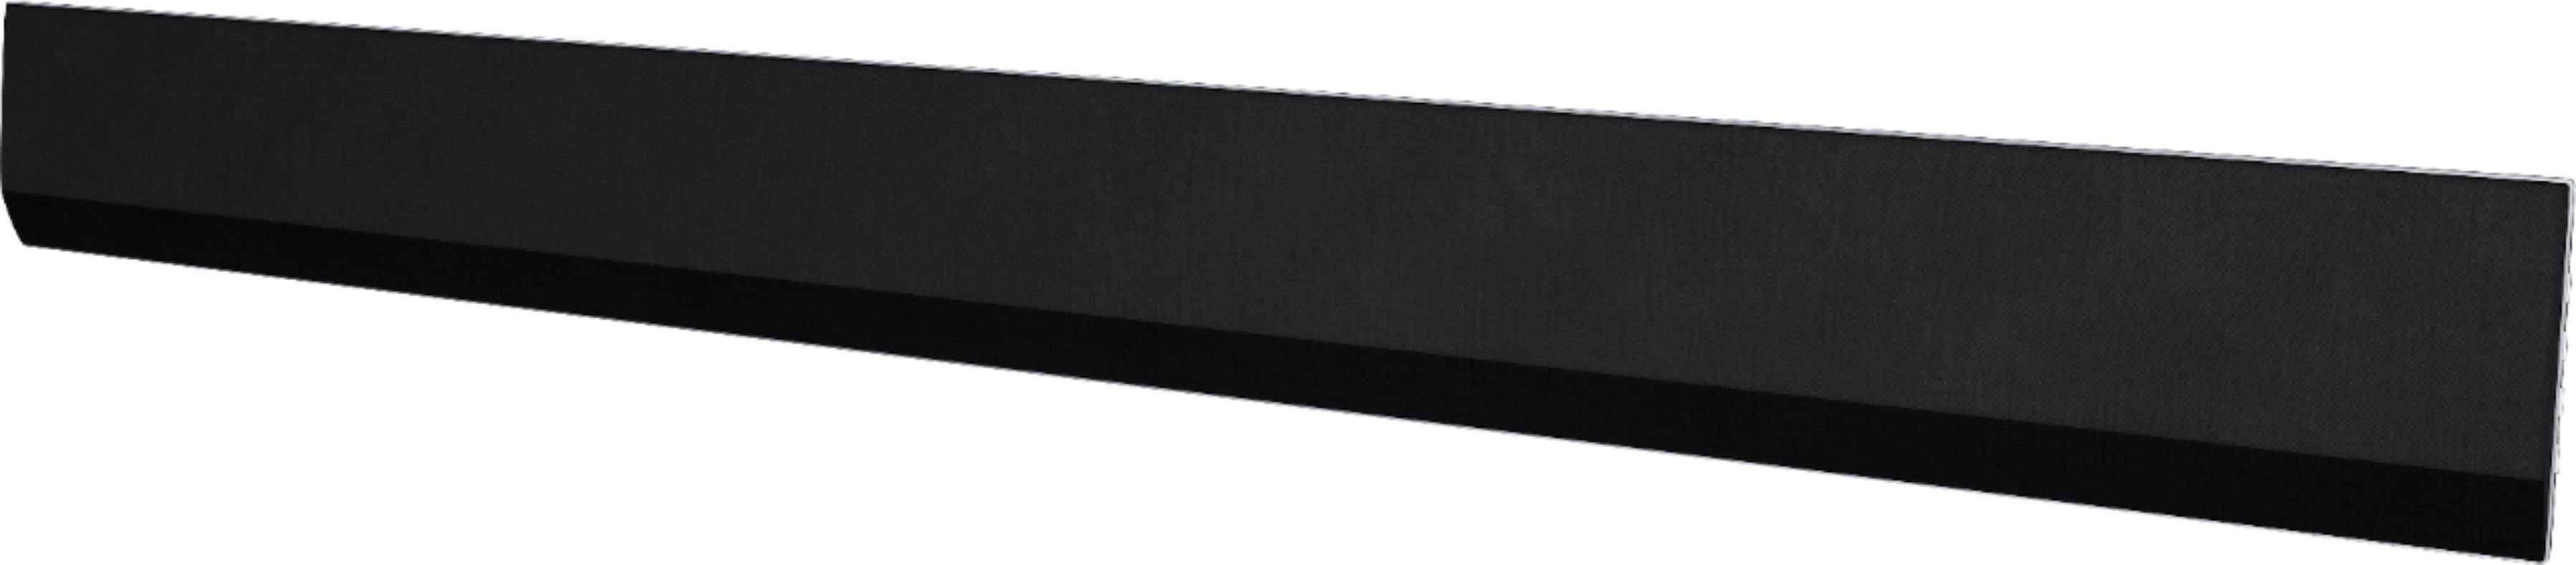 Left View: LG - 3.1-Channel 420W Soundbar System with Wireless Subwoofer and Dolby Atmos - Black